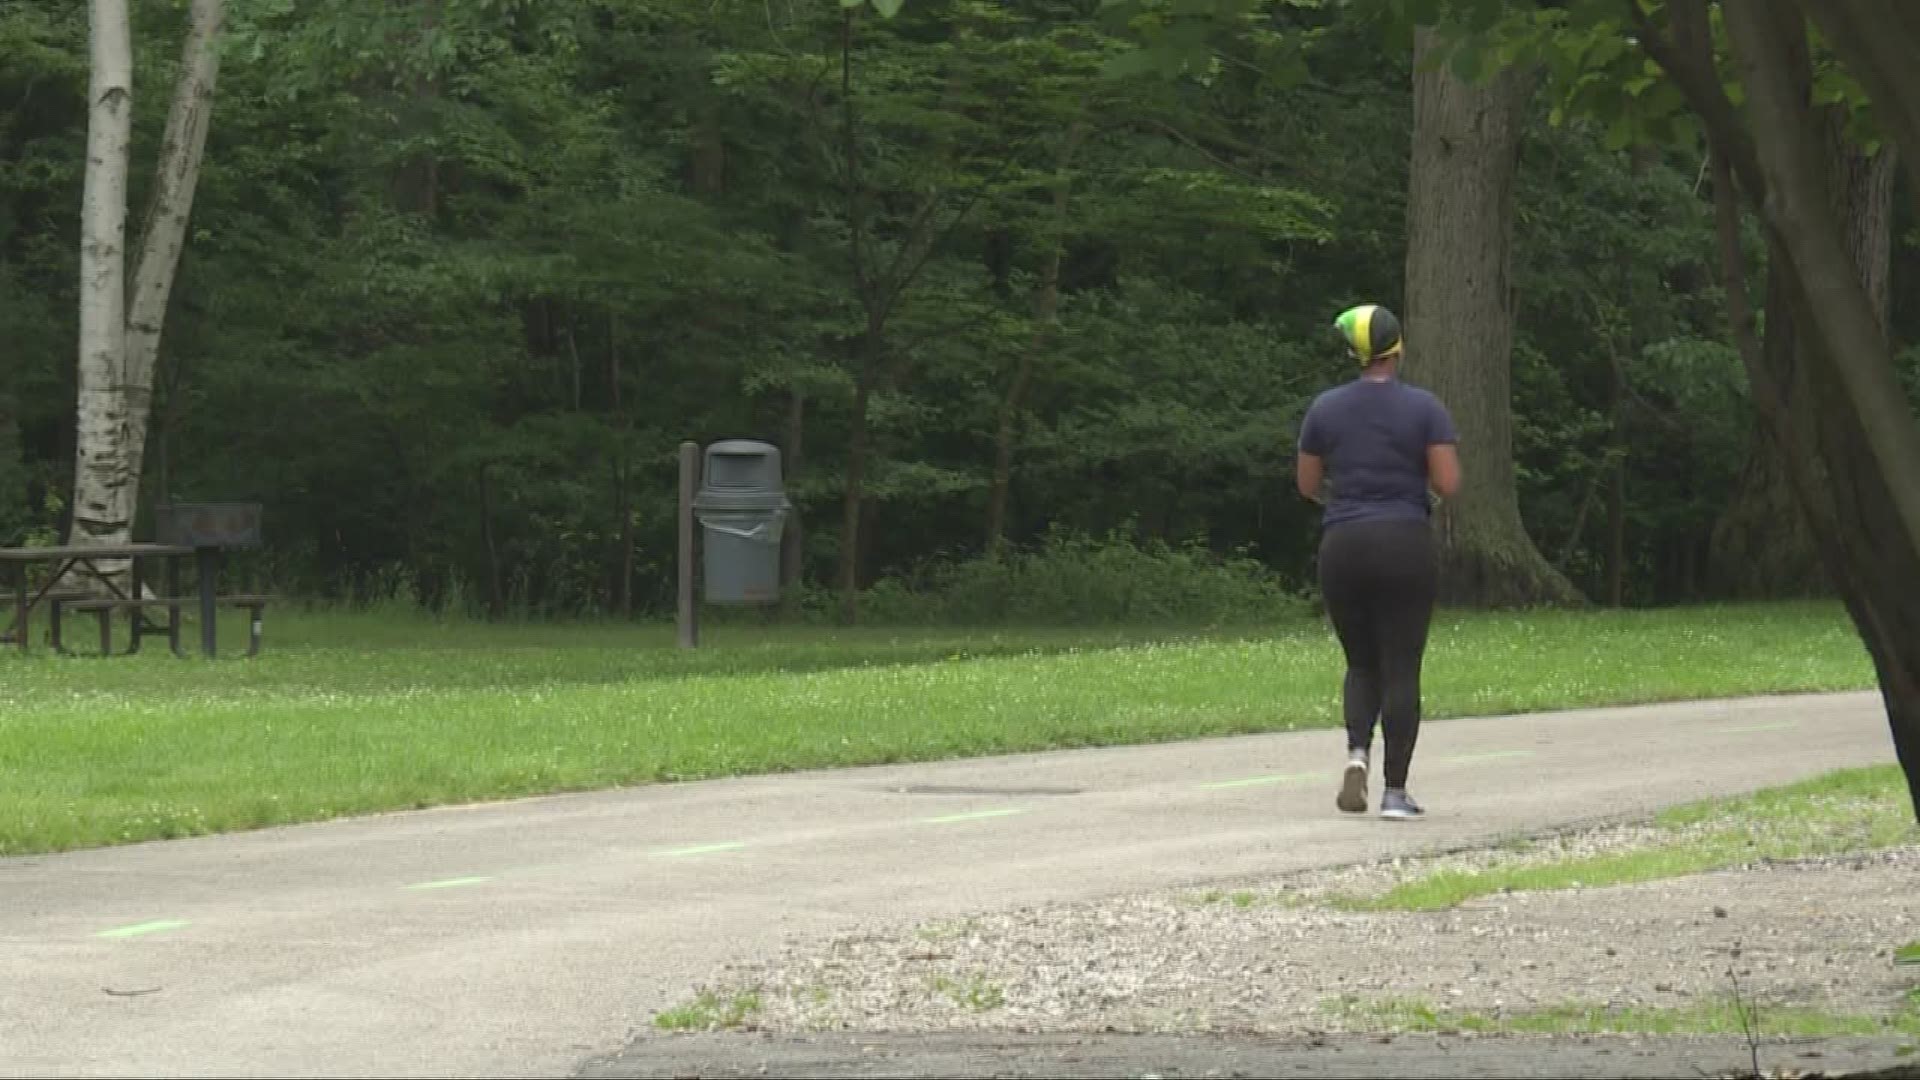 Metro parks rangers and police are searching for man that attacked woman